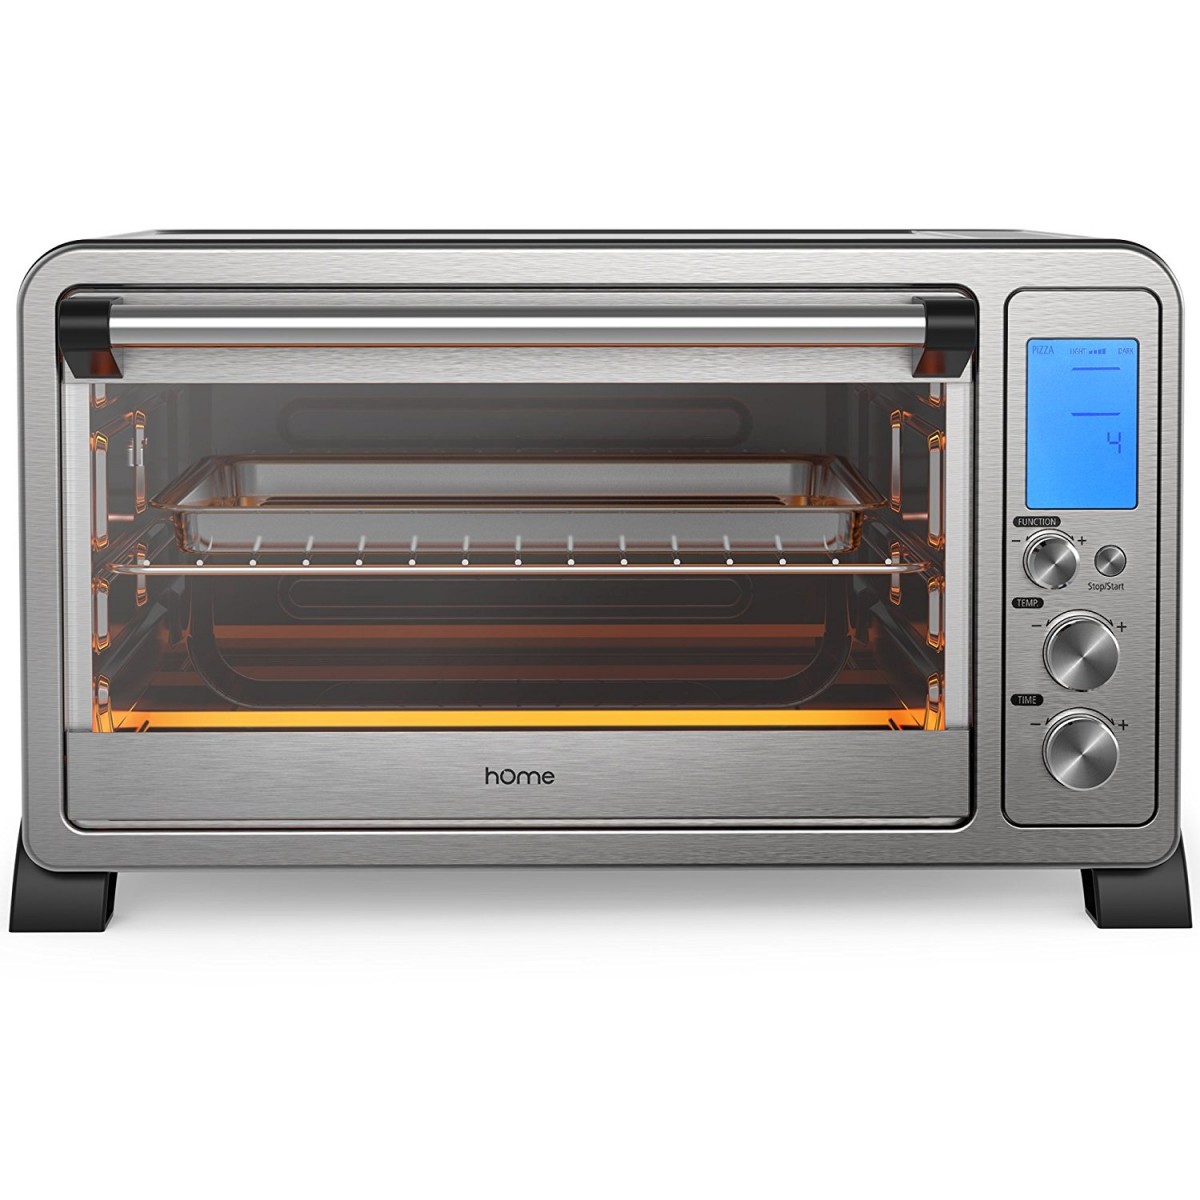 Hamilton Beach Countertop Oven with Convection and Rotisserie (Discontinued)